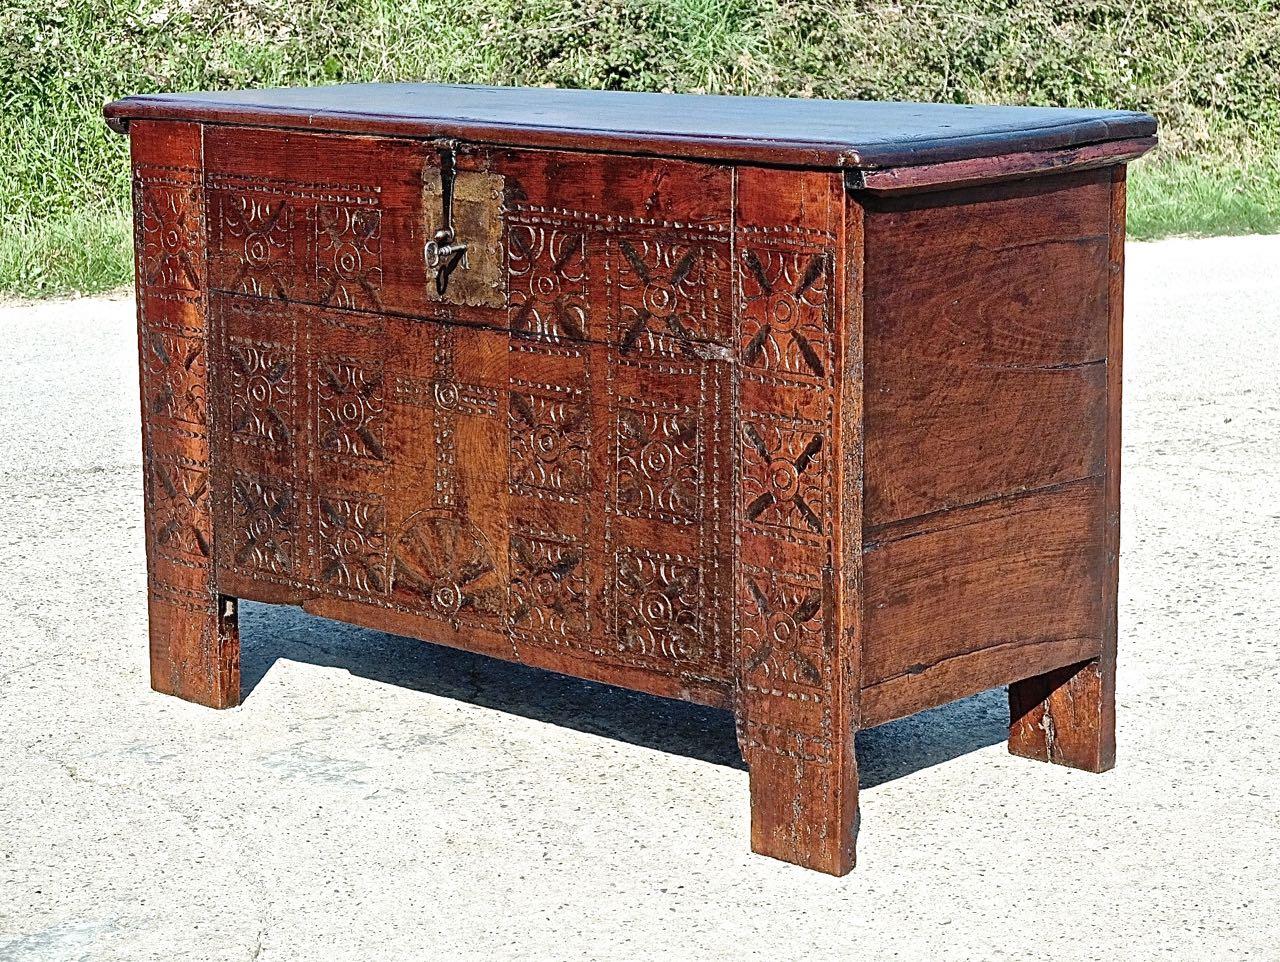 A beautifully preserved 18th century mixed wood Basque arms chest from the ancient mountain town of Etxarri Aranatz in the rugged north of the province of Navarra, Spain.

Featuring a chestnut top, sides, back and center front panel with solid